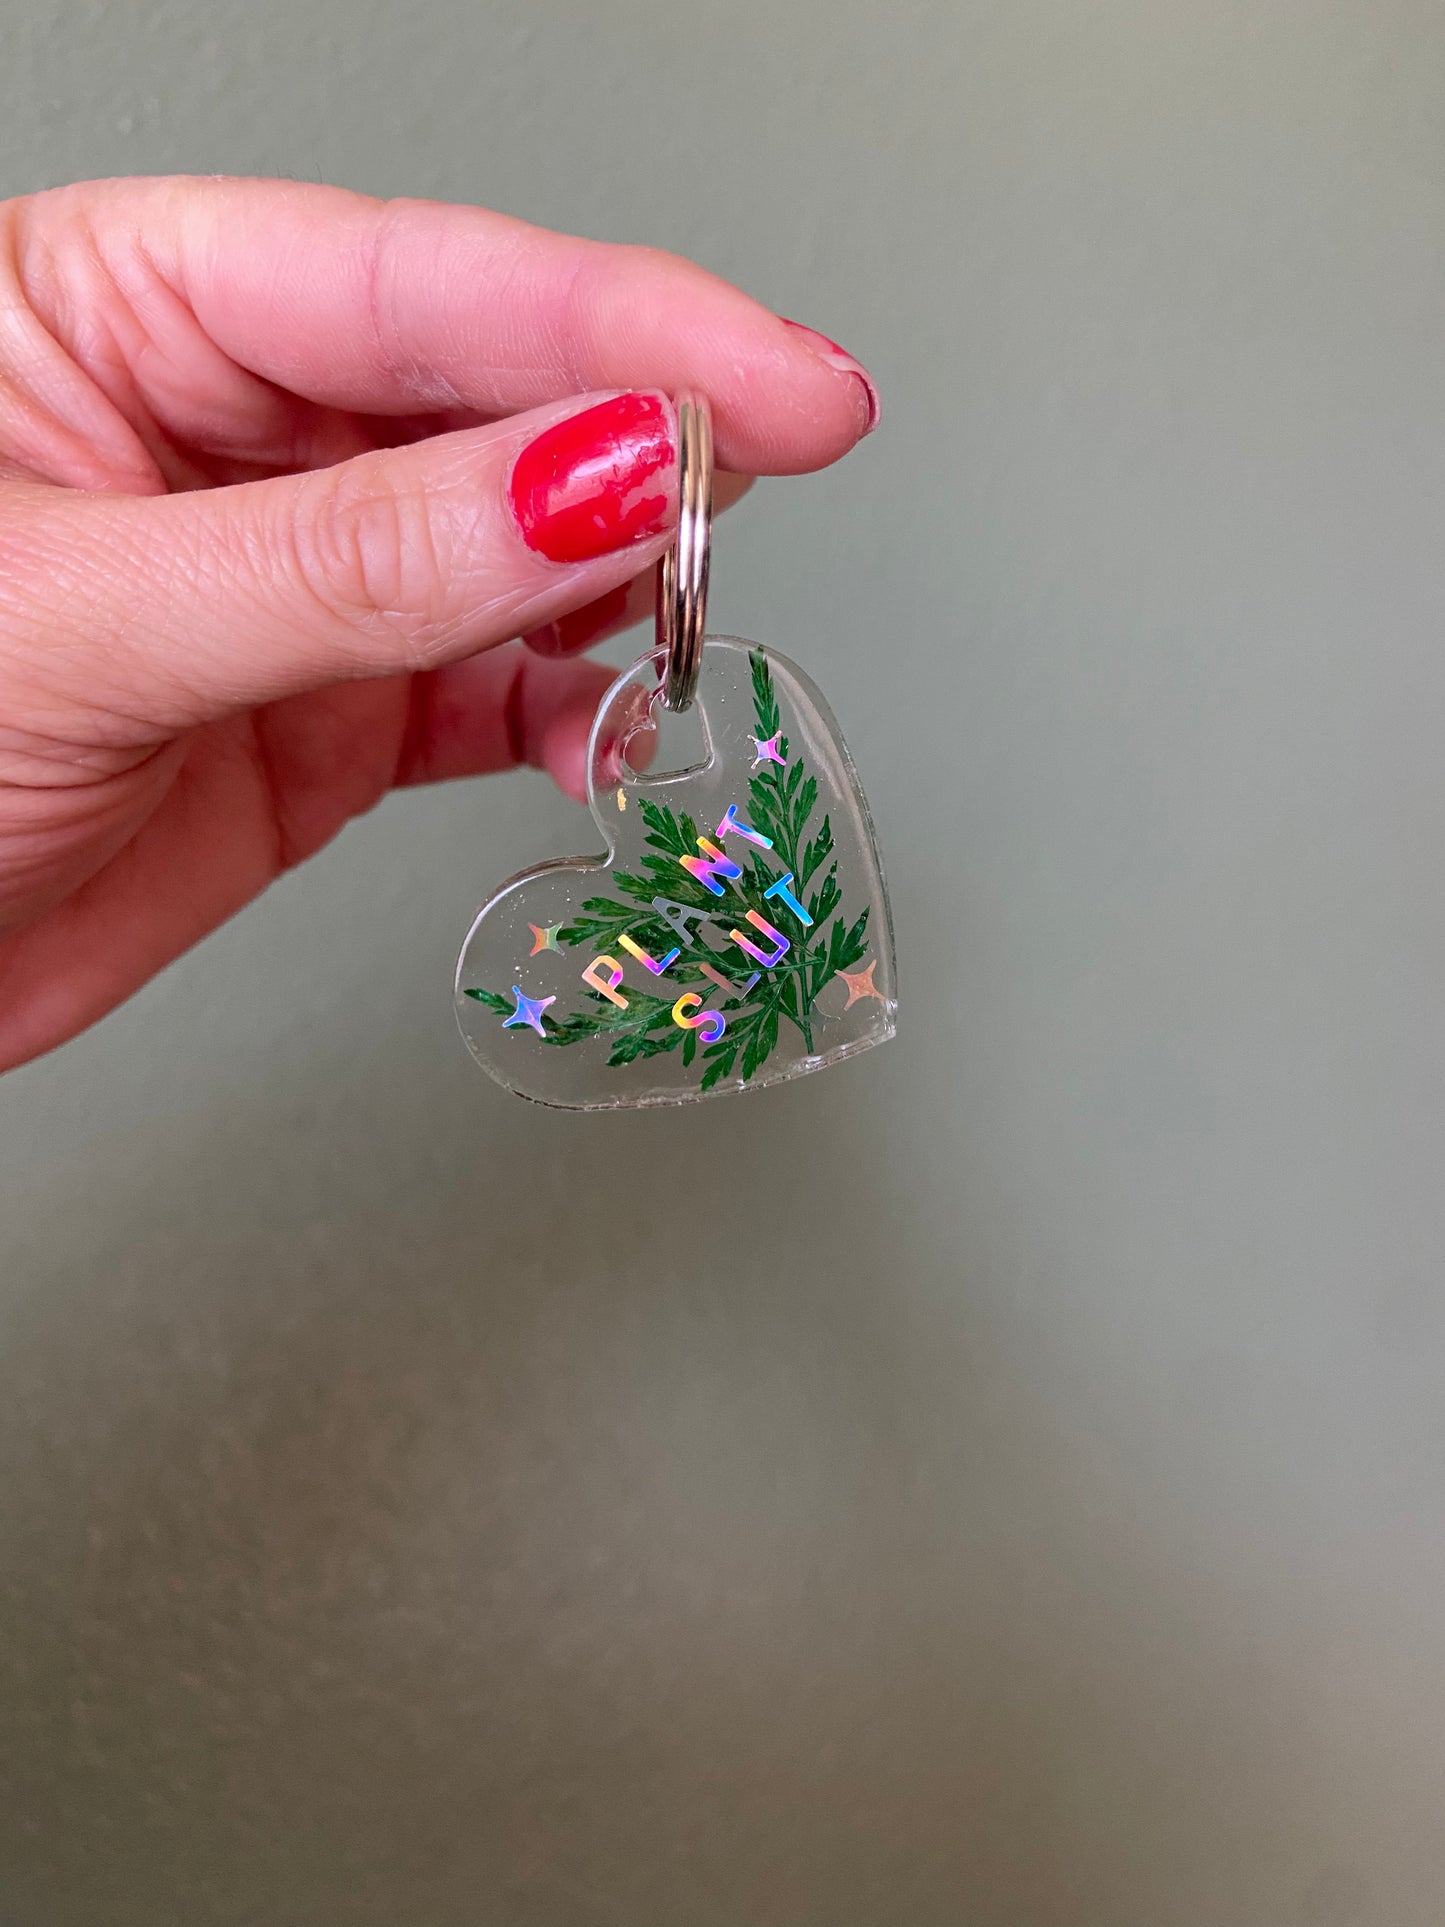 Plant Slut- Holographic letters custom keychain with real pressed leaves, heart shape